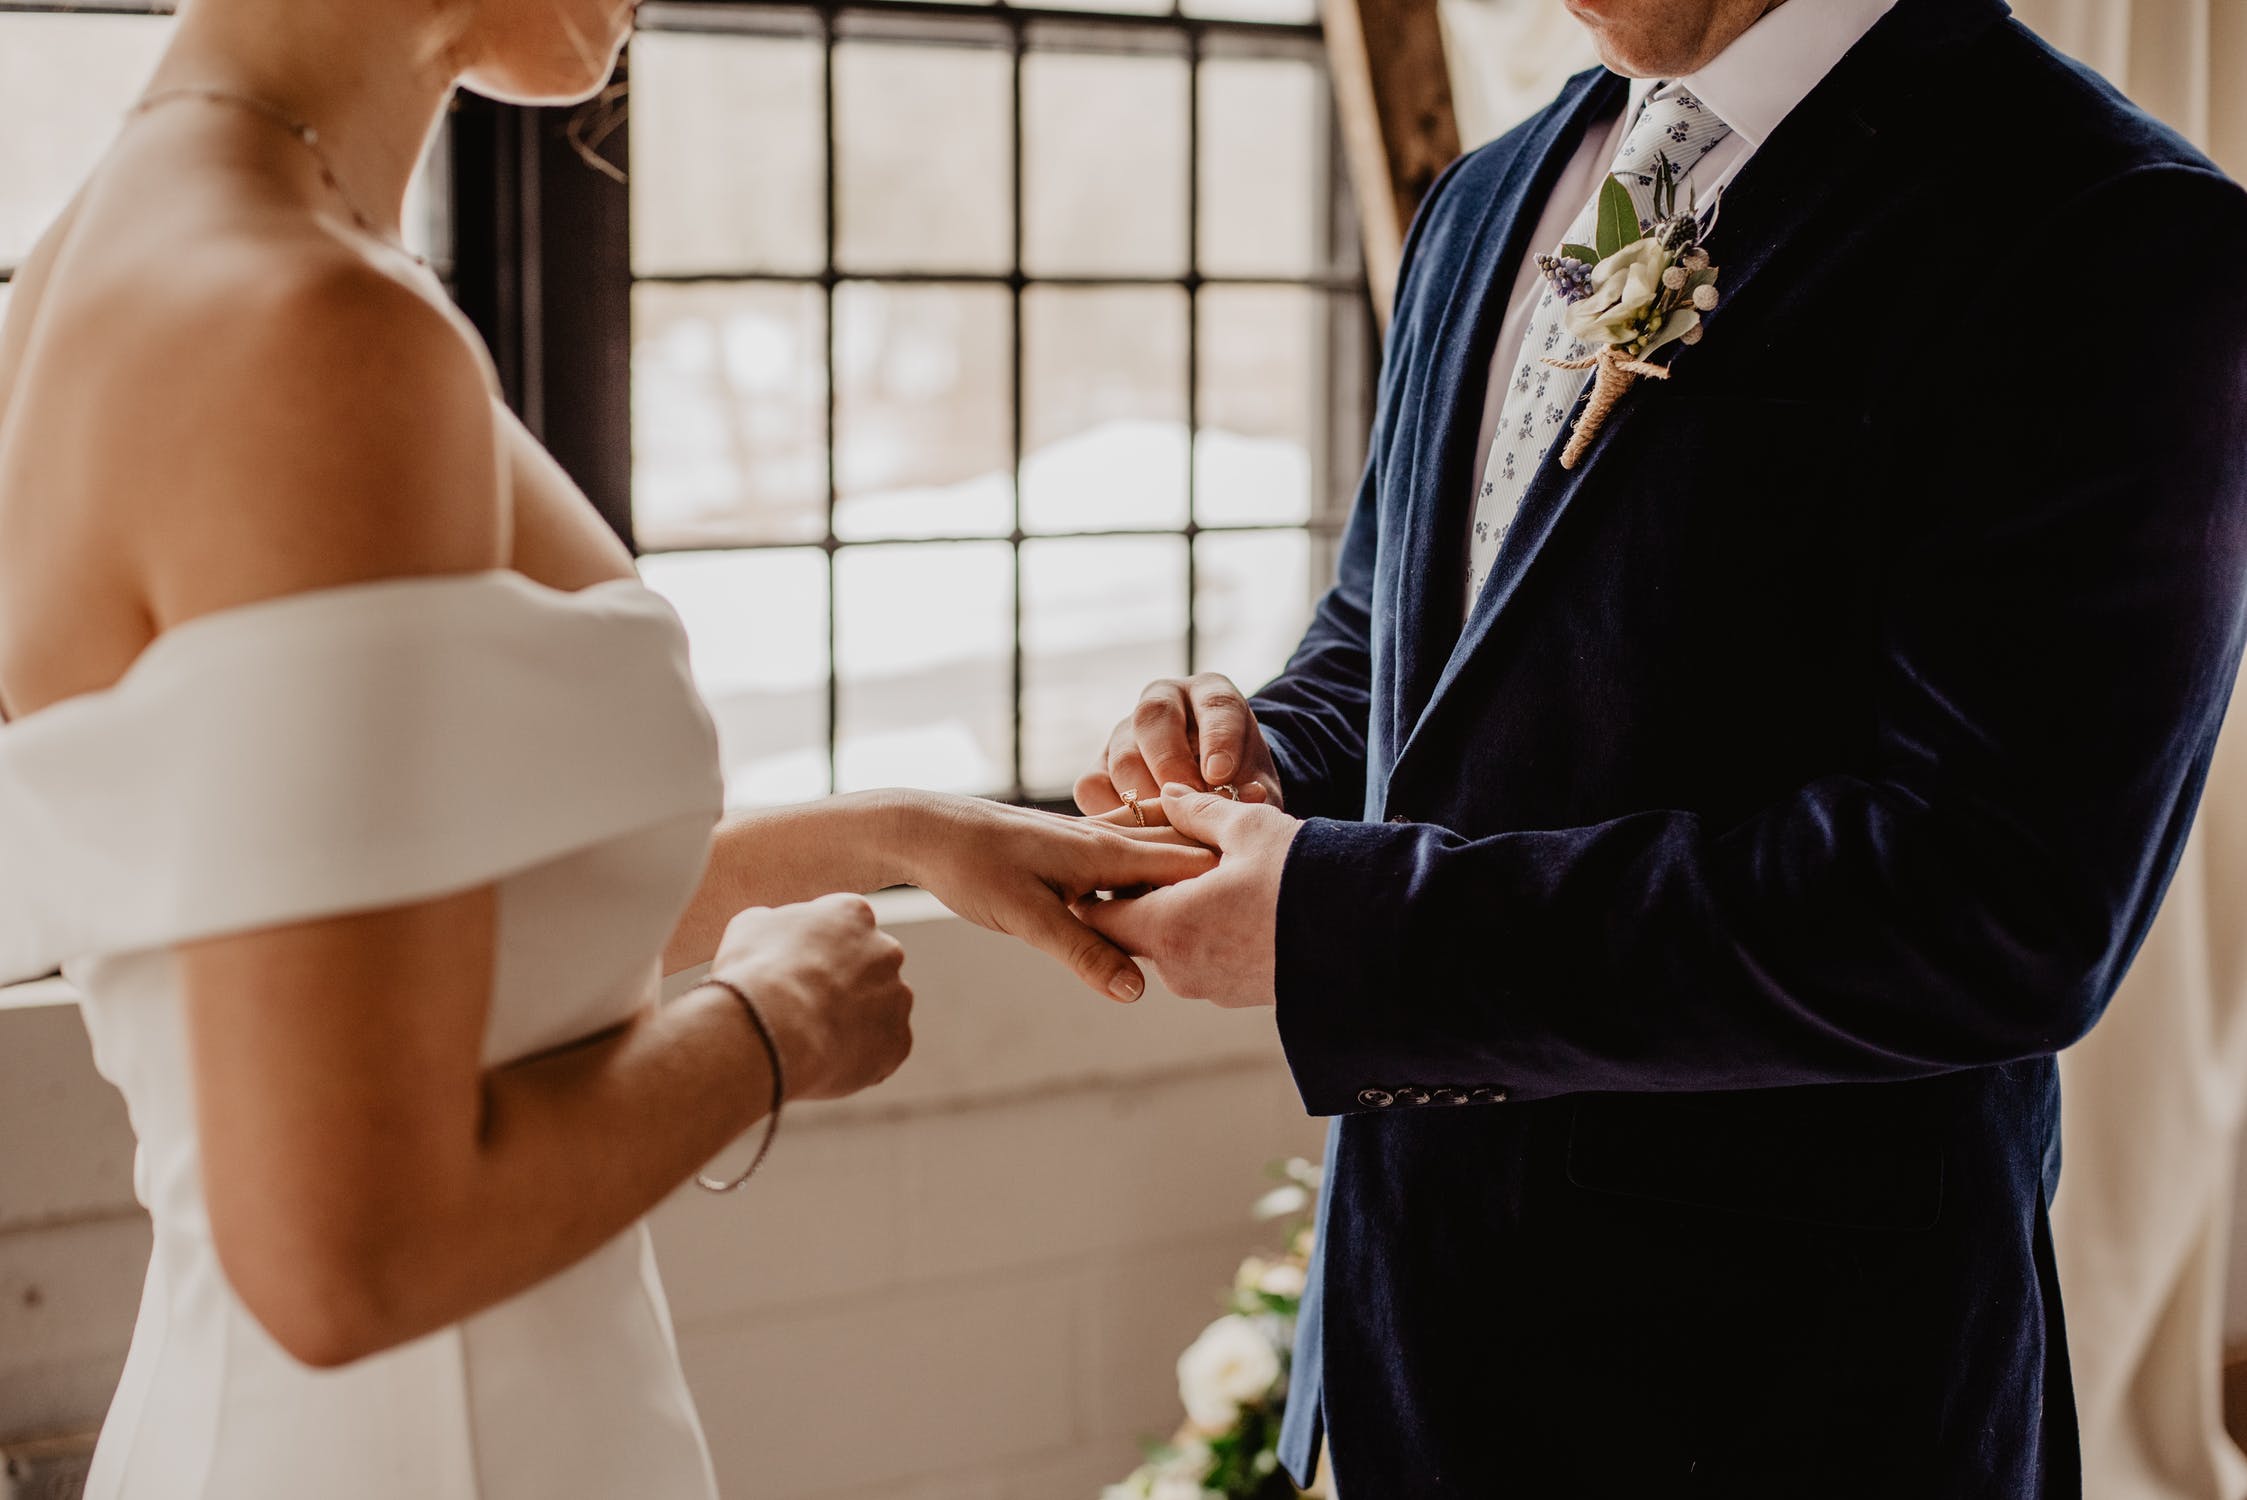 Linda read all about their romantic wedding in the newspapers | Source: Pexels